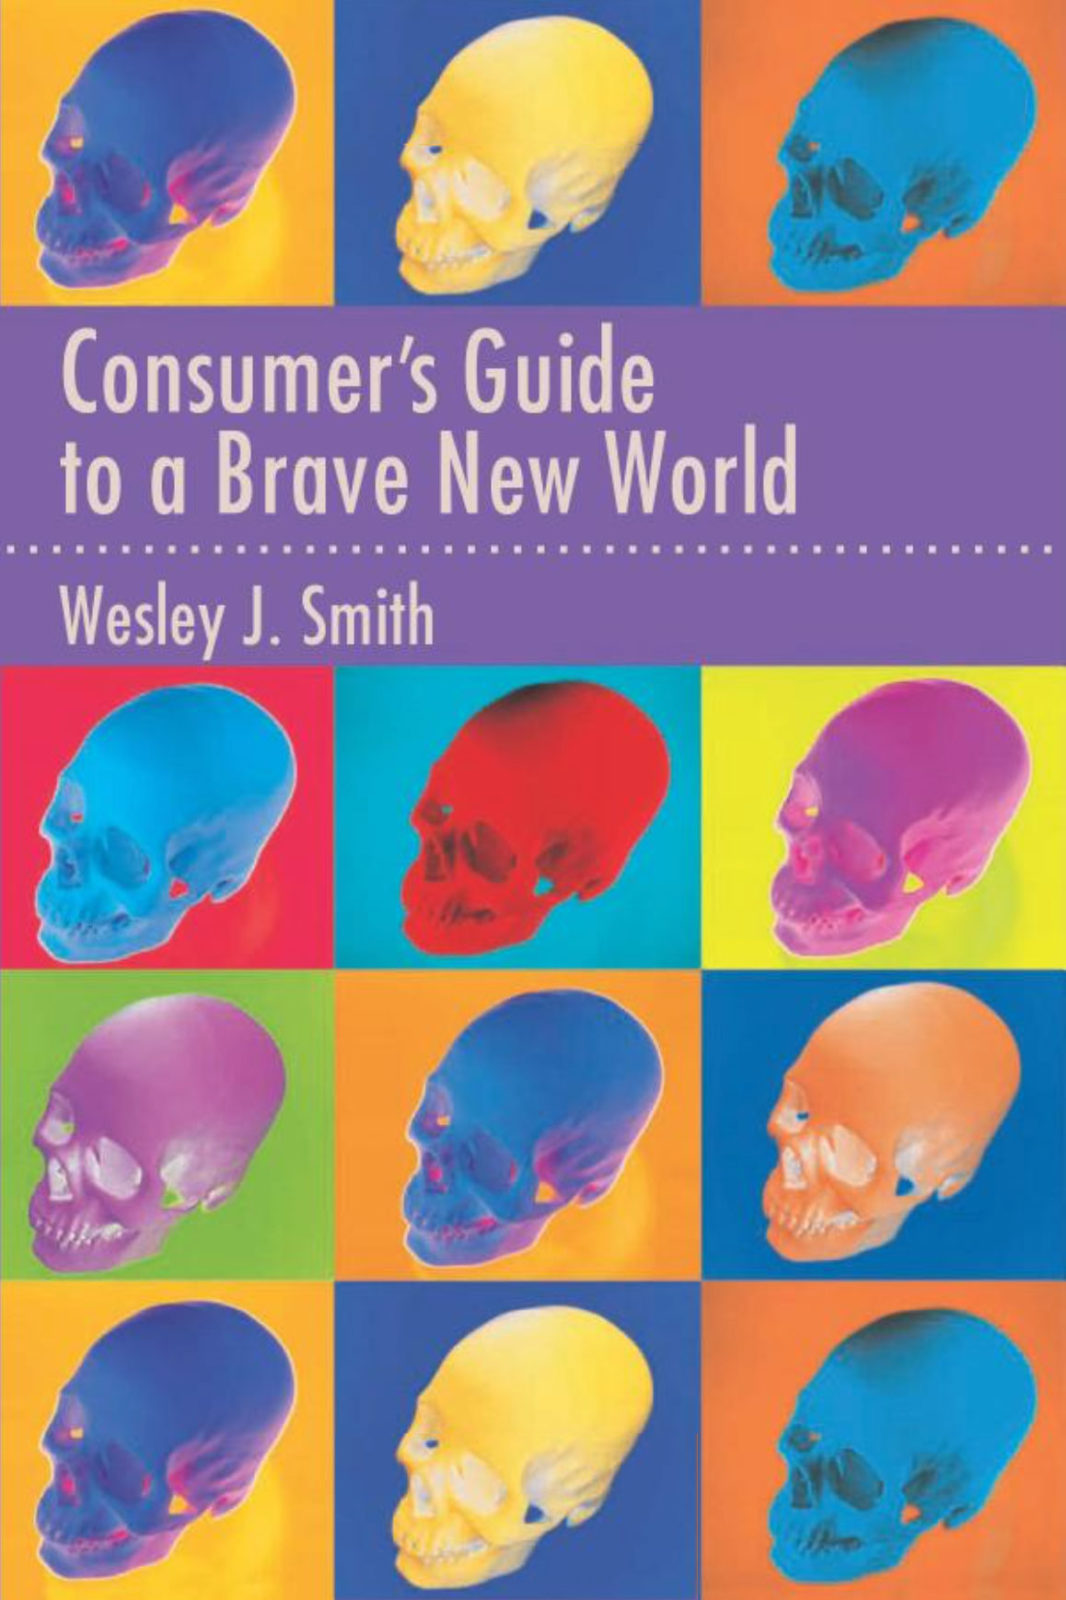 Consumers Guide to a Brave New World